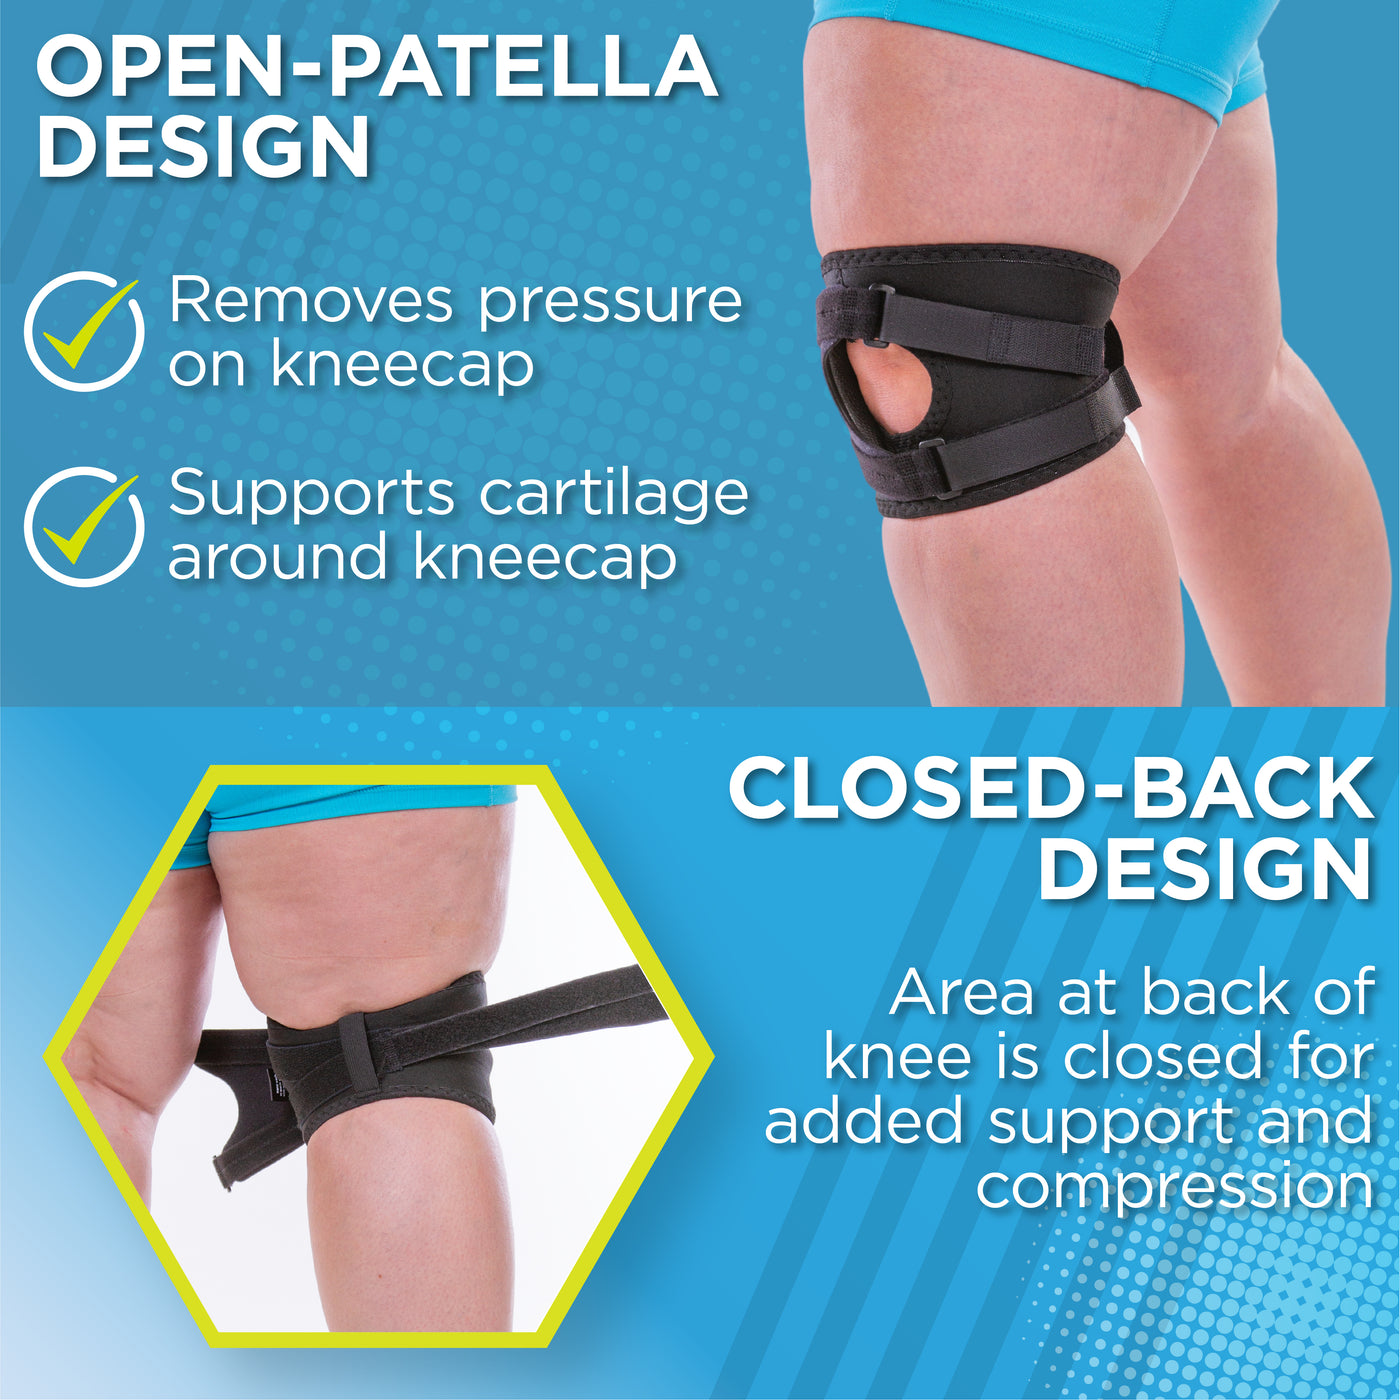 The knee brace for dislocated kneecap has an open front design to remove pressure on kneecap and closed back for compression and support